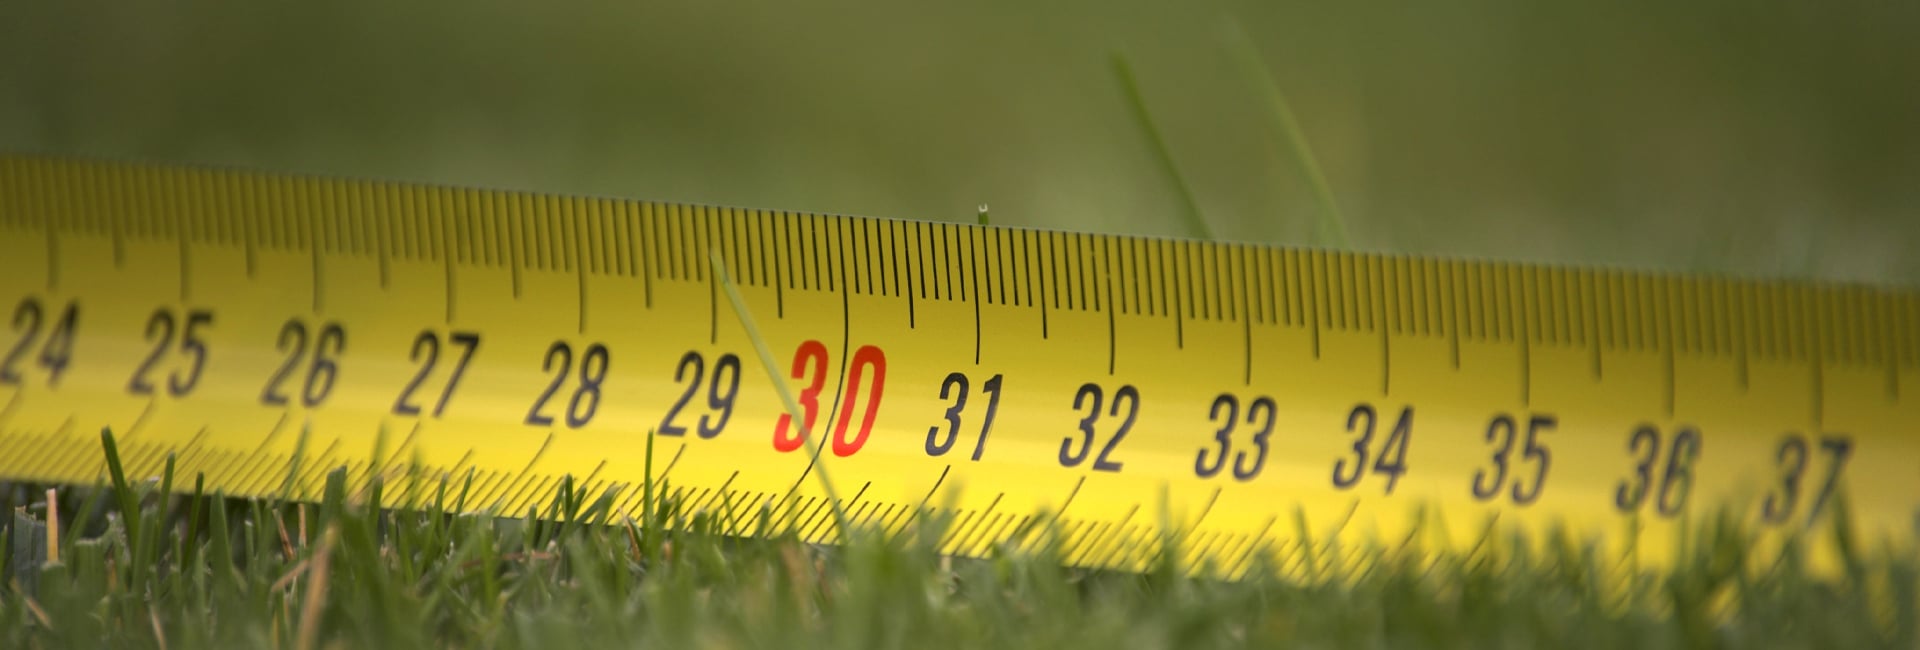 Tape Measure for Determining How Many Linear Feet of Fence Material You Need